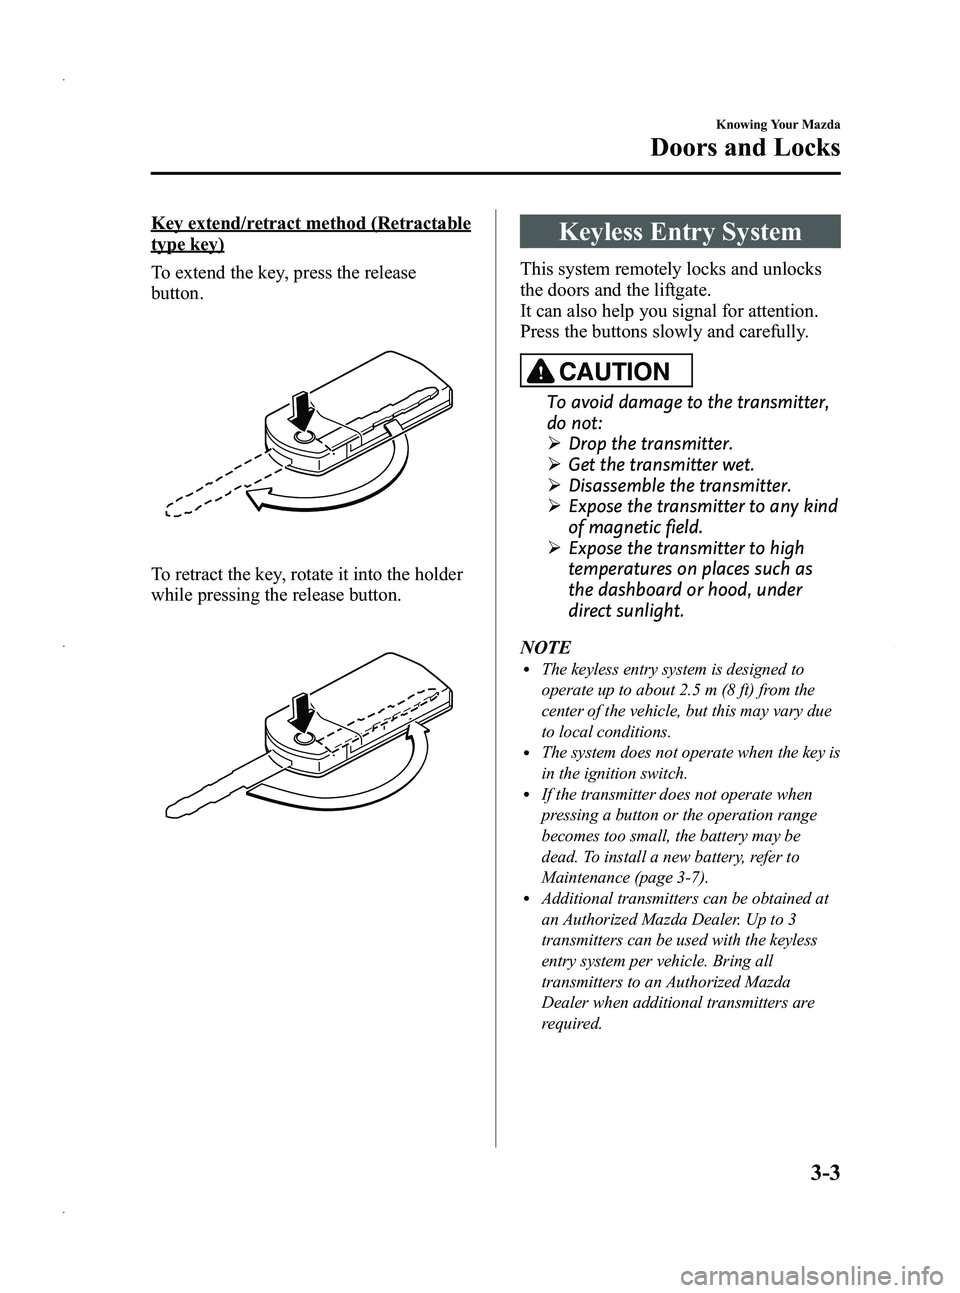 MAZDA MODEL 5 2013  Owners Manual Black plate (81,1)
Key extend/retract method (Retractable
type key)
To extend the key, press the release
button.
To retract the key, rotate it into the holder
while pressing the release button.
Keyles